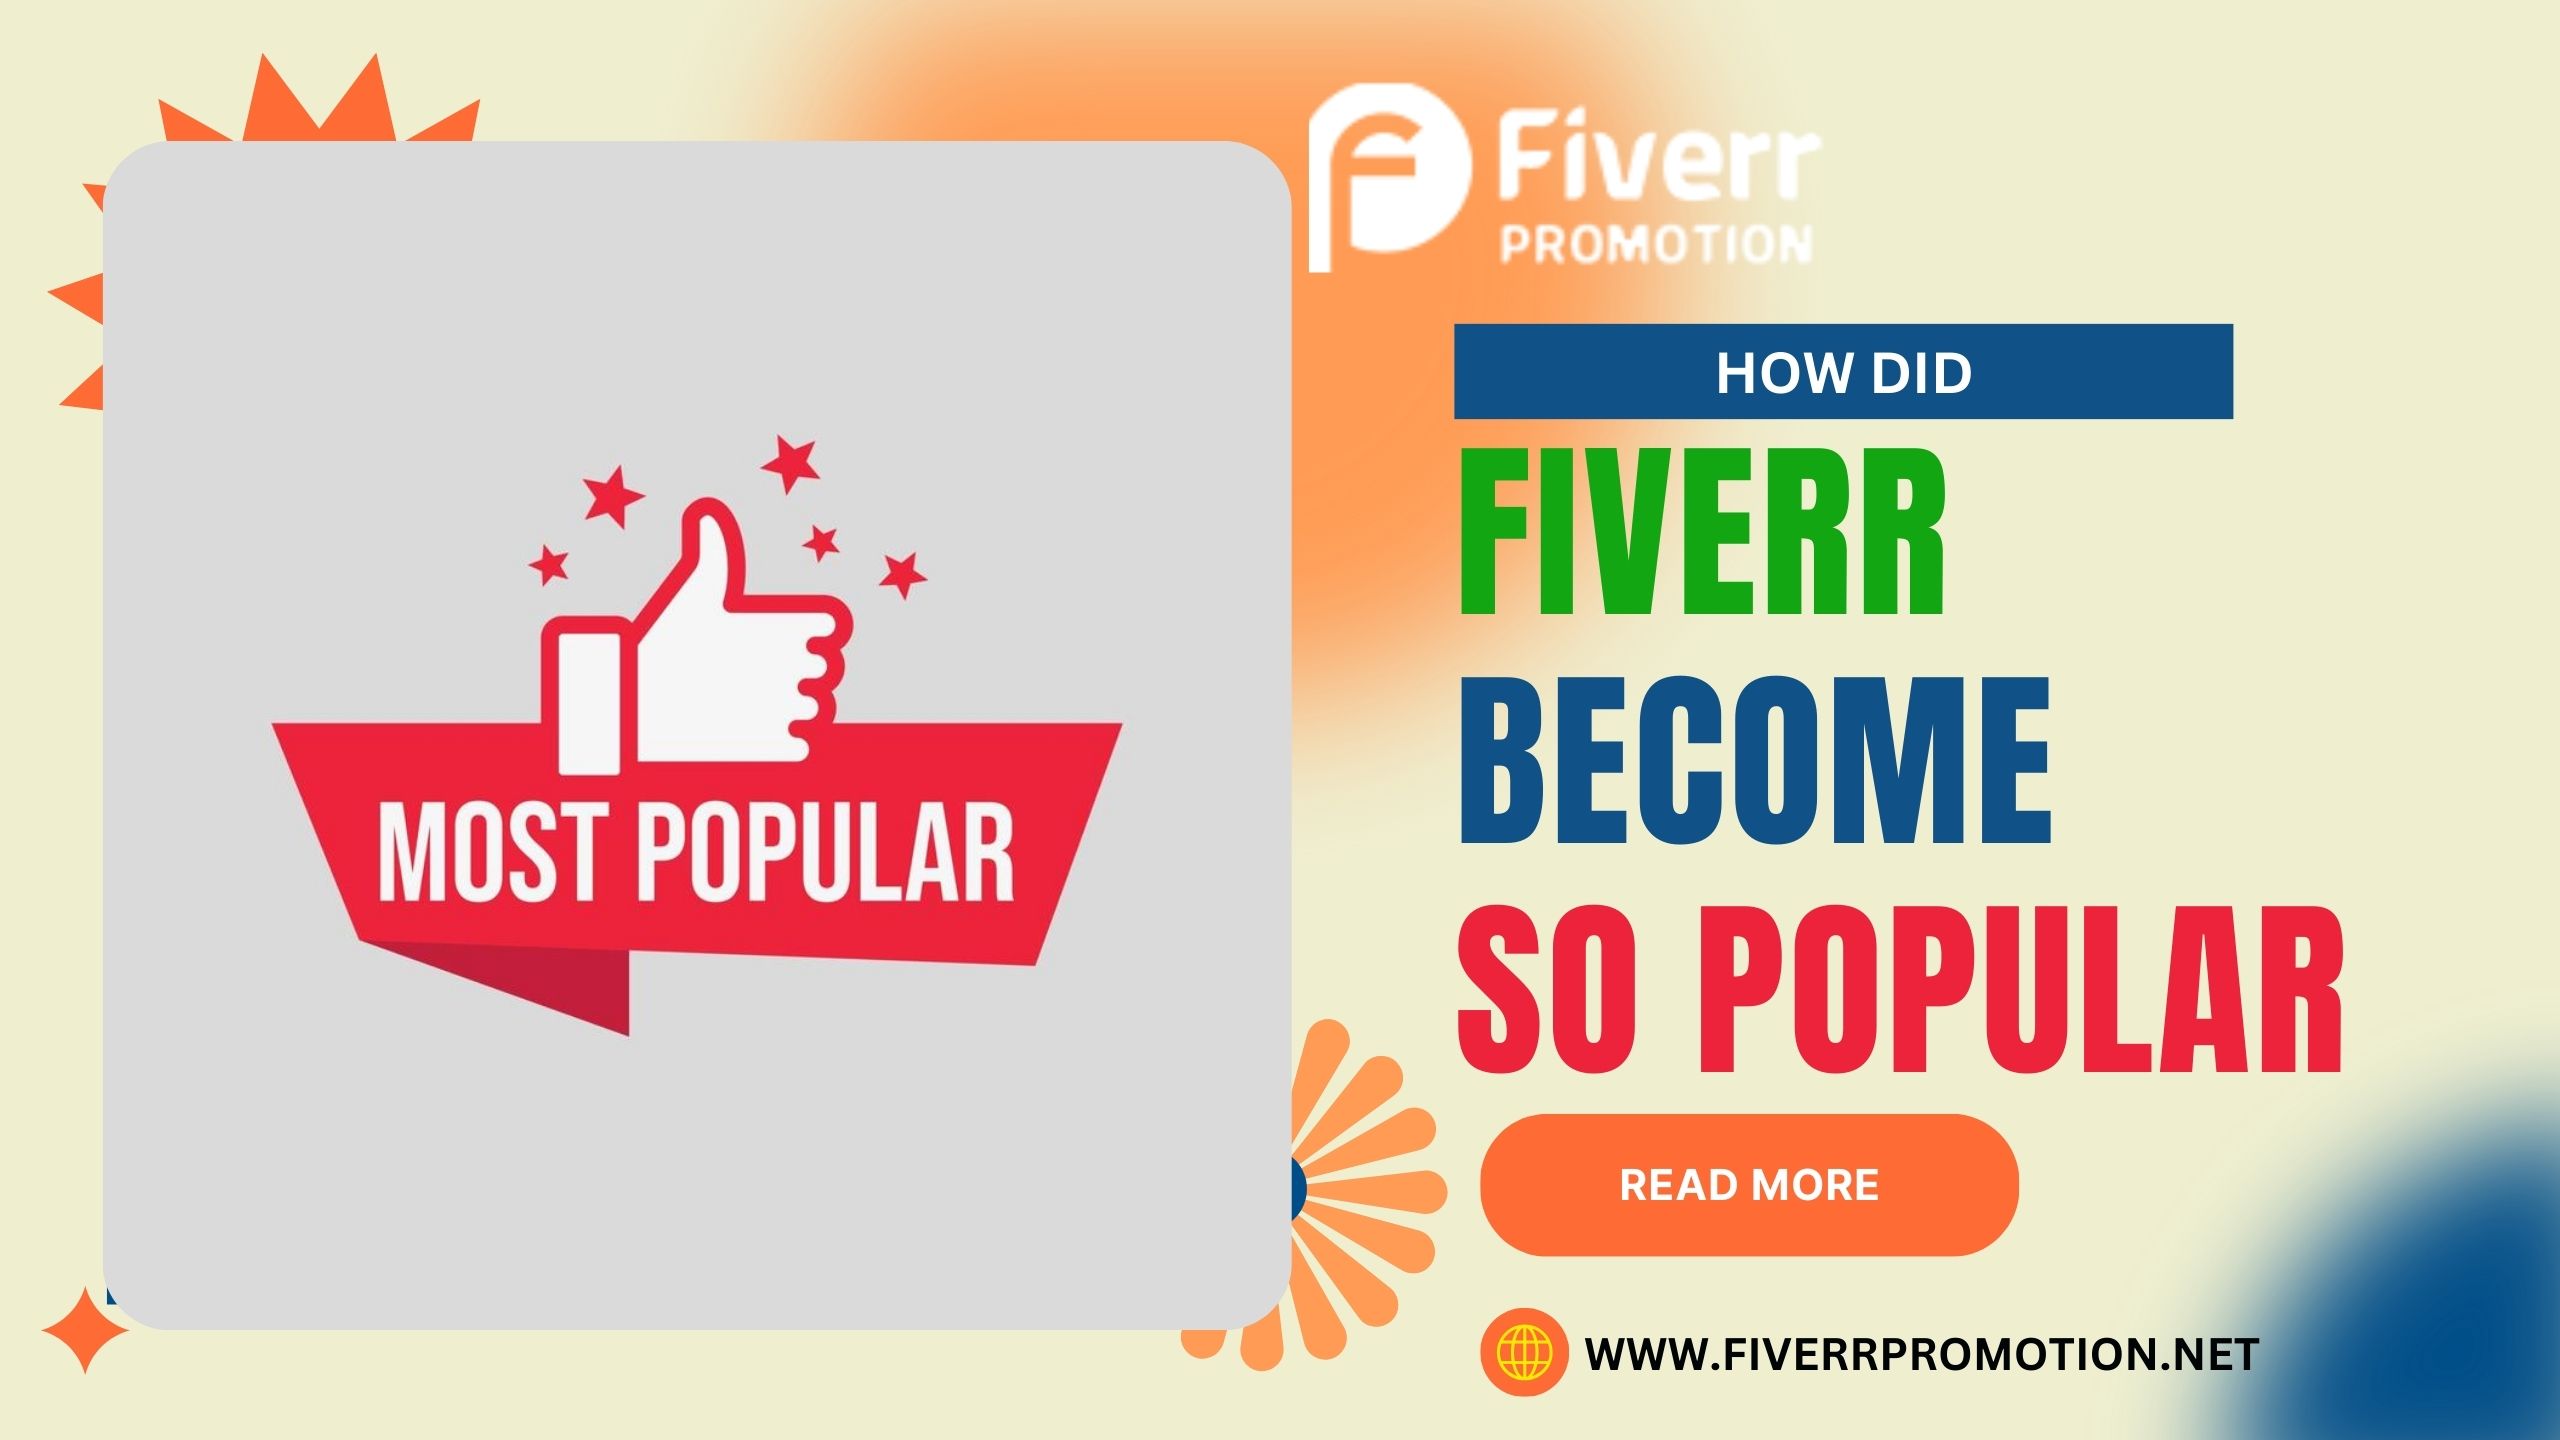 How Did Fiverr Become So Popular